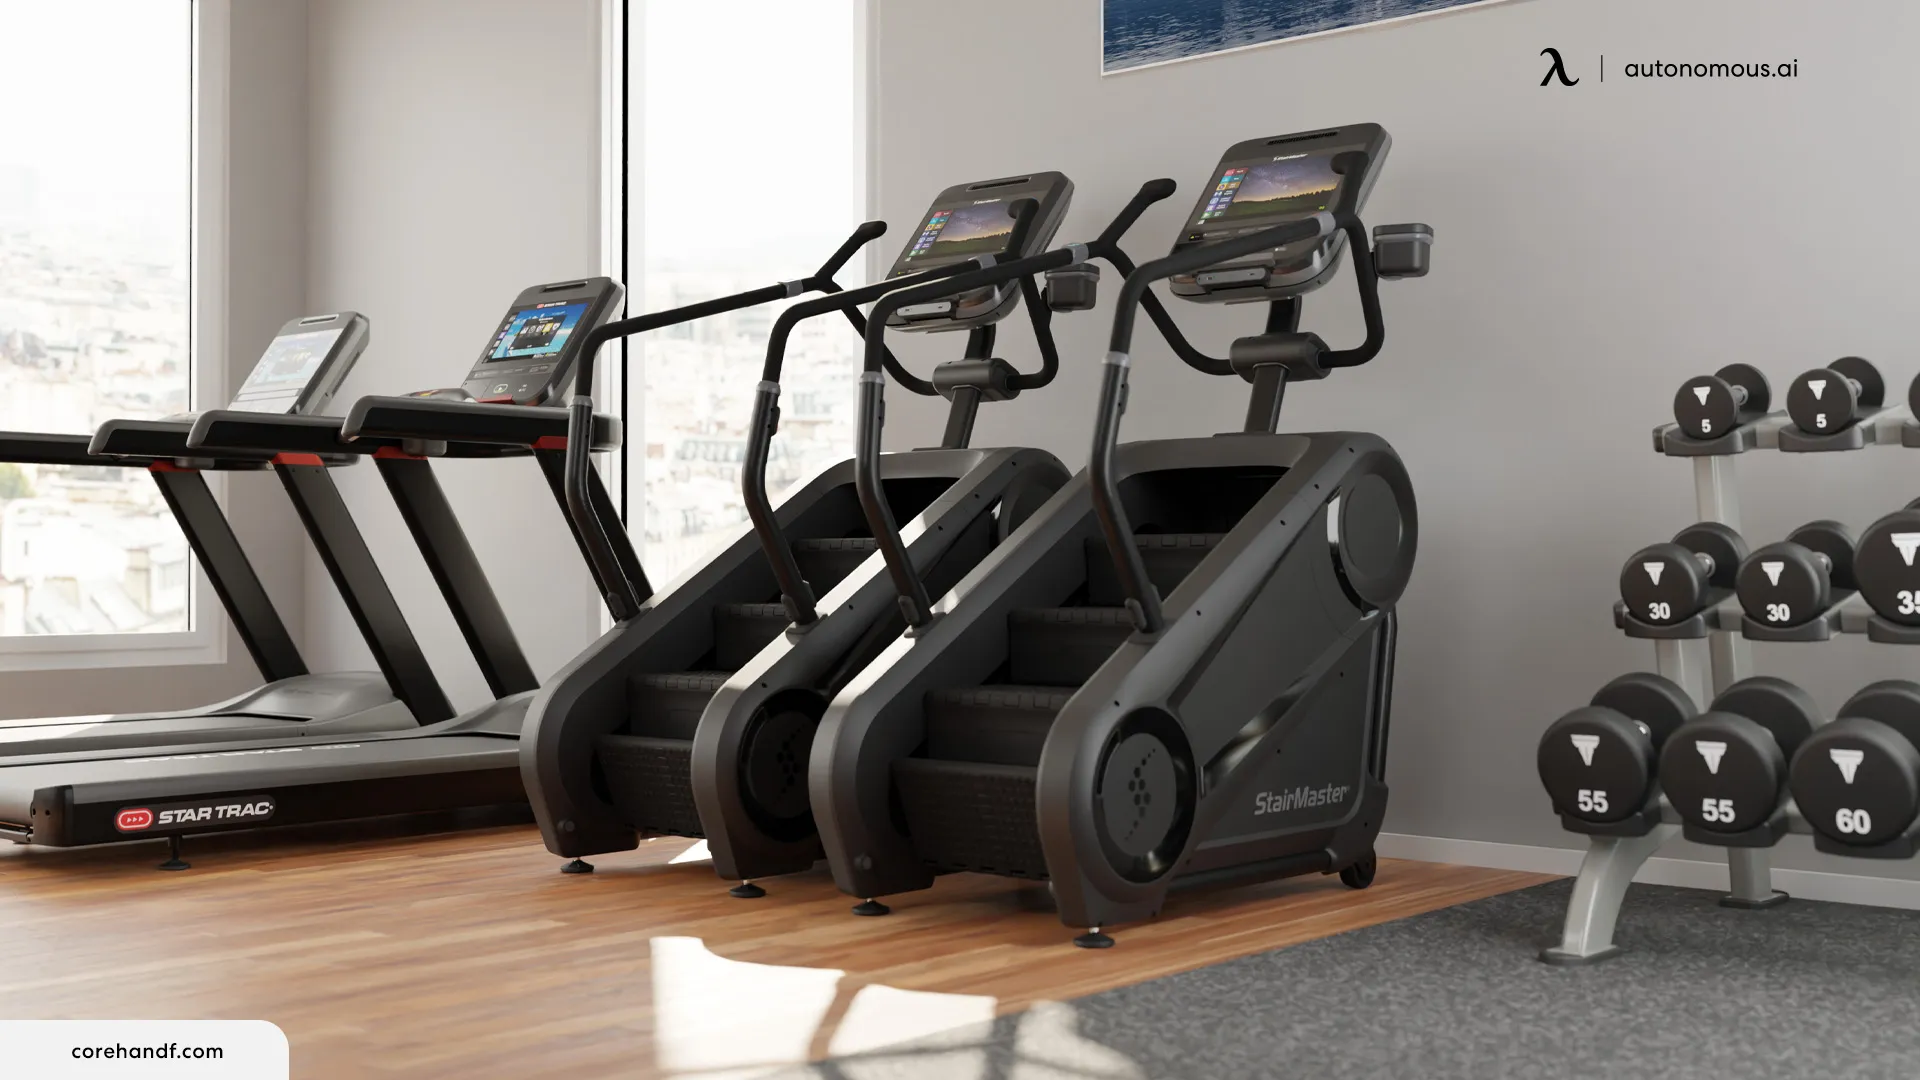 What is a StairMaster?